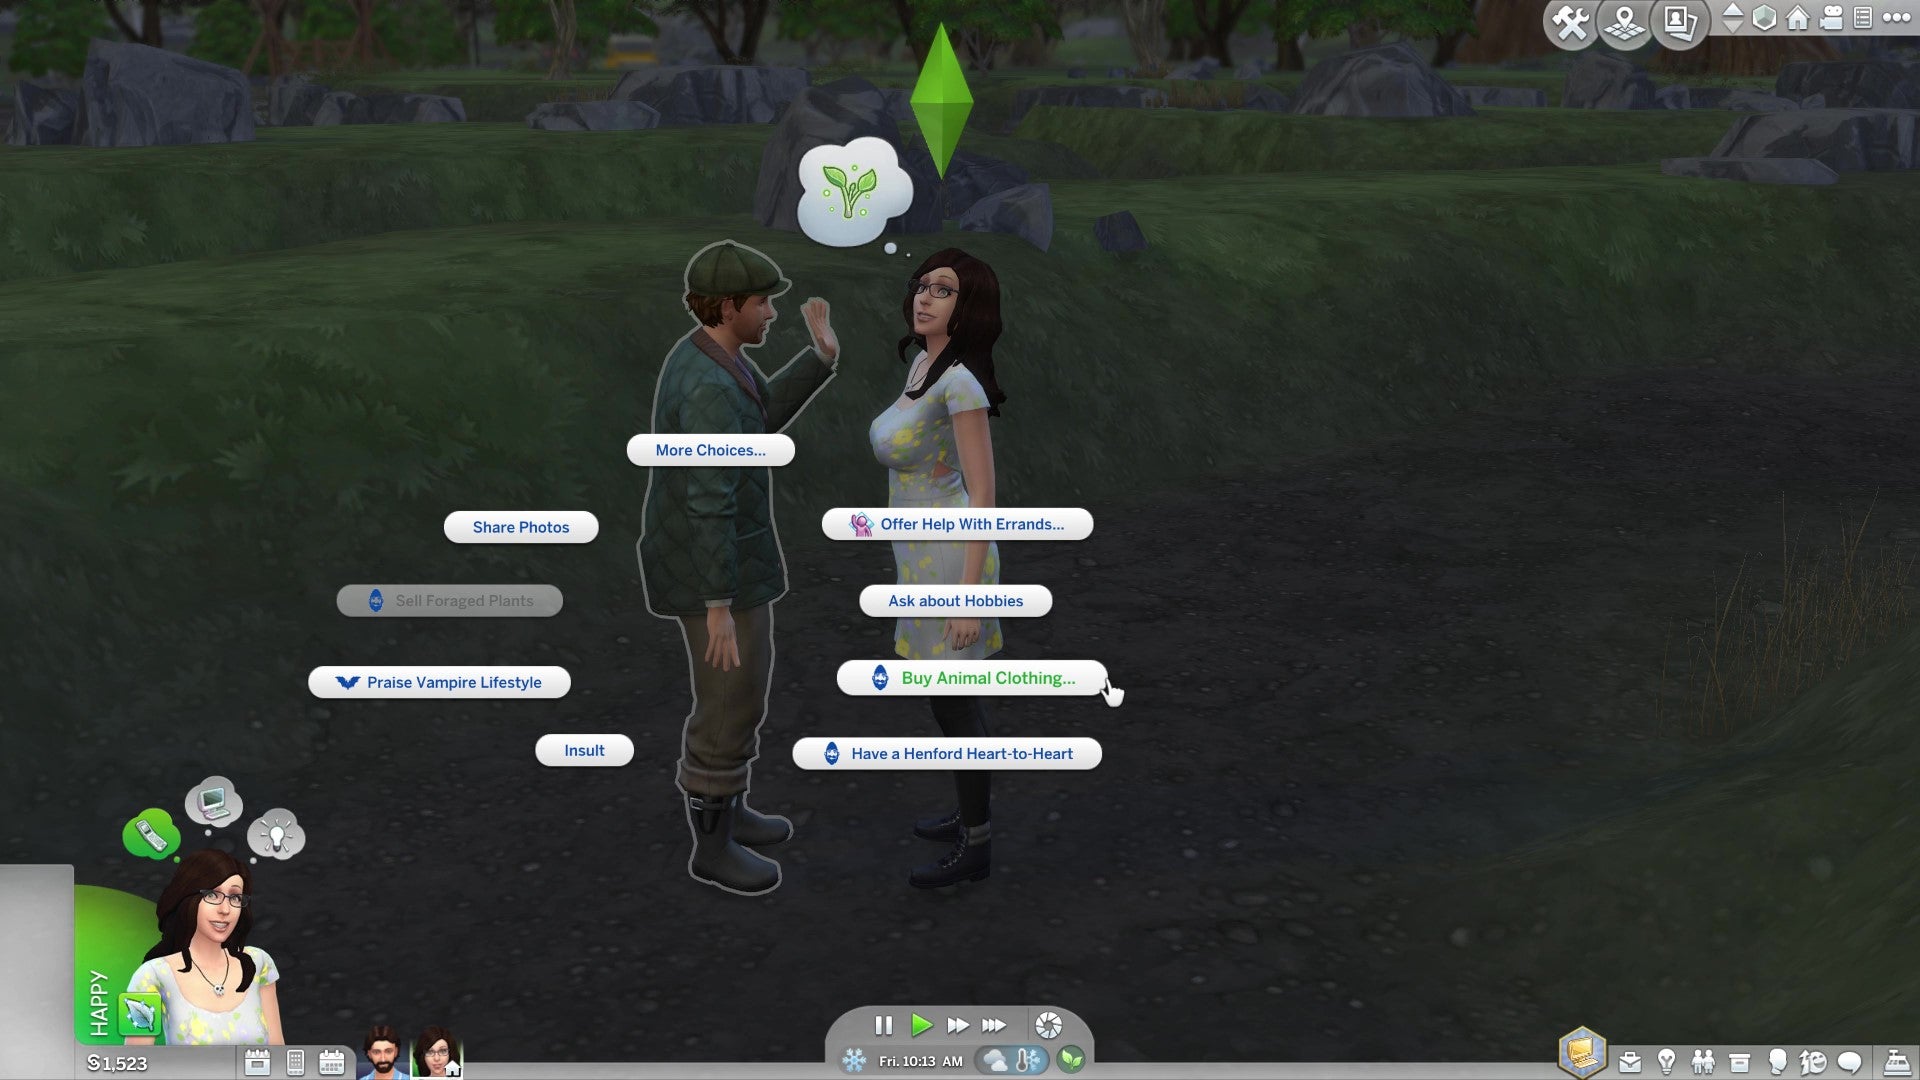 Two Sims in conversation. The highlighted dialogue option reads "Buy Animal Clothing..."